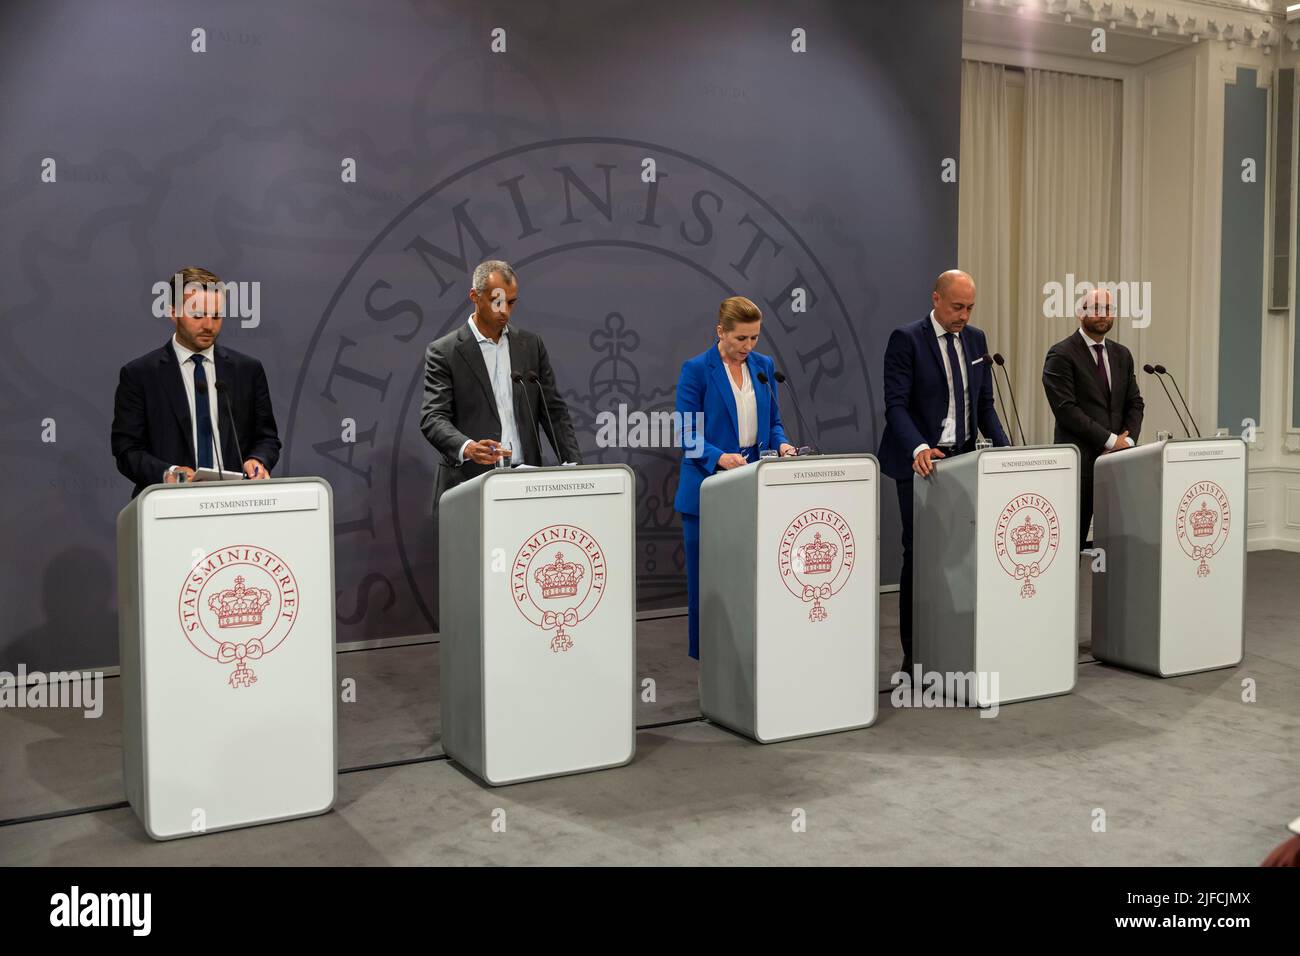 COPENHAGEN, DENMARK - JULY 01, 2022: Danish Prime Minister, Mette Frederiksen seen at the press conference at the Ministry of State in Copenhagen, whe Stock Photo